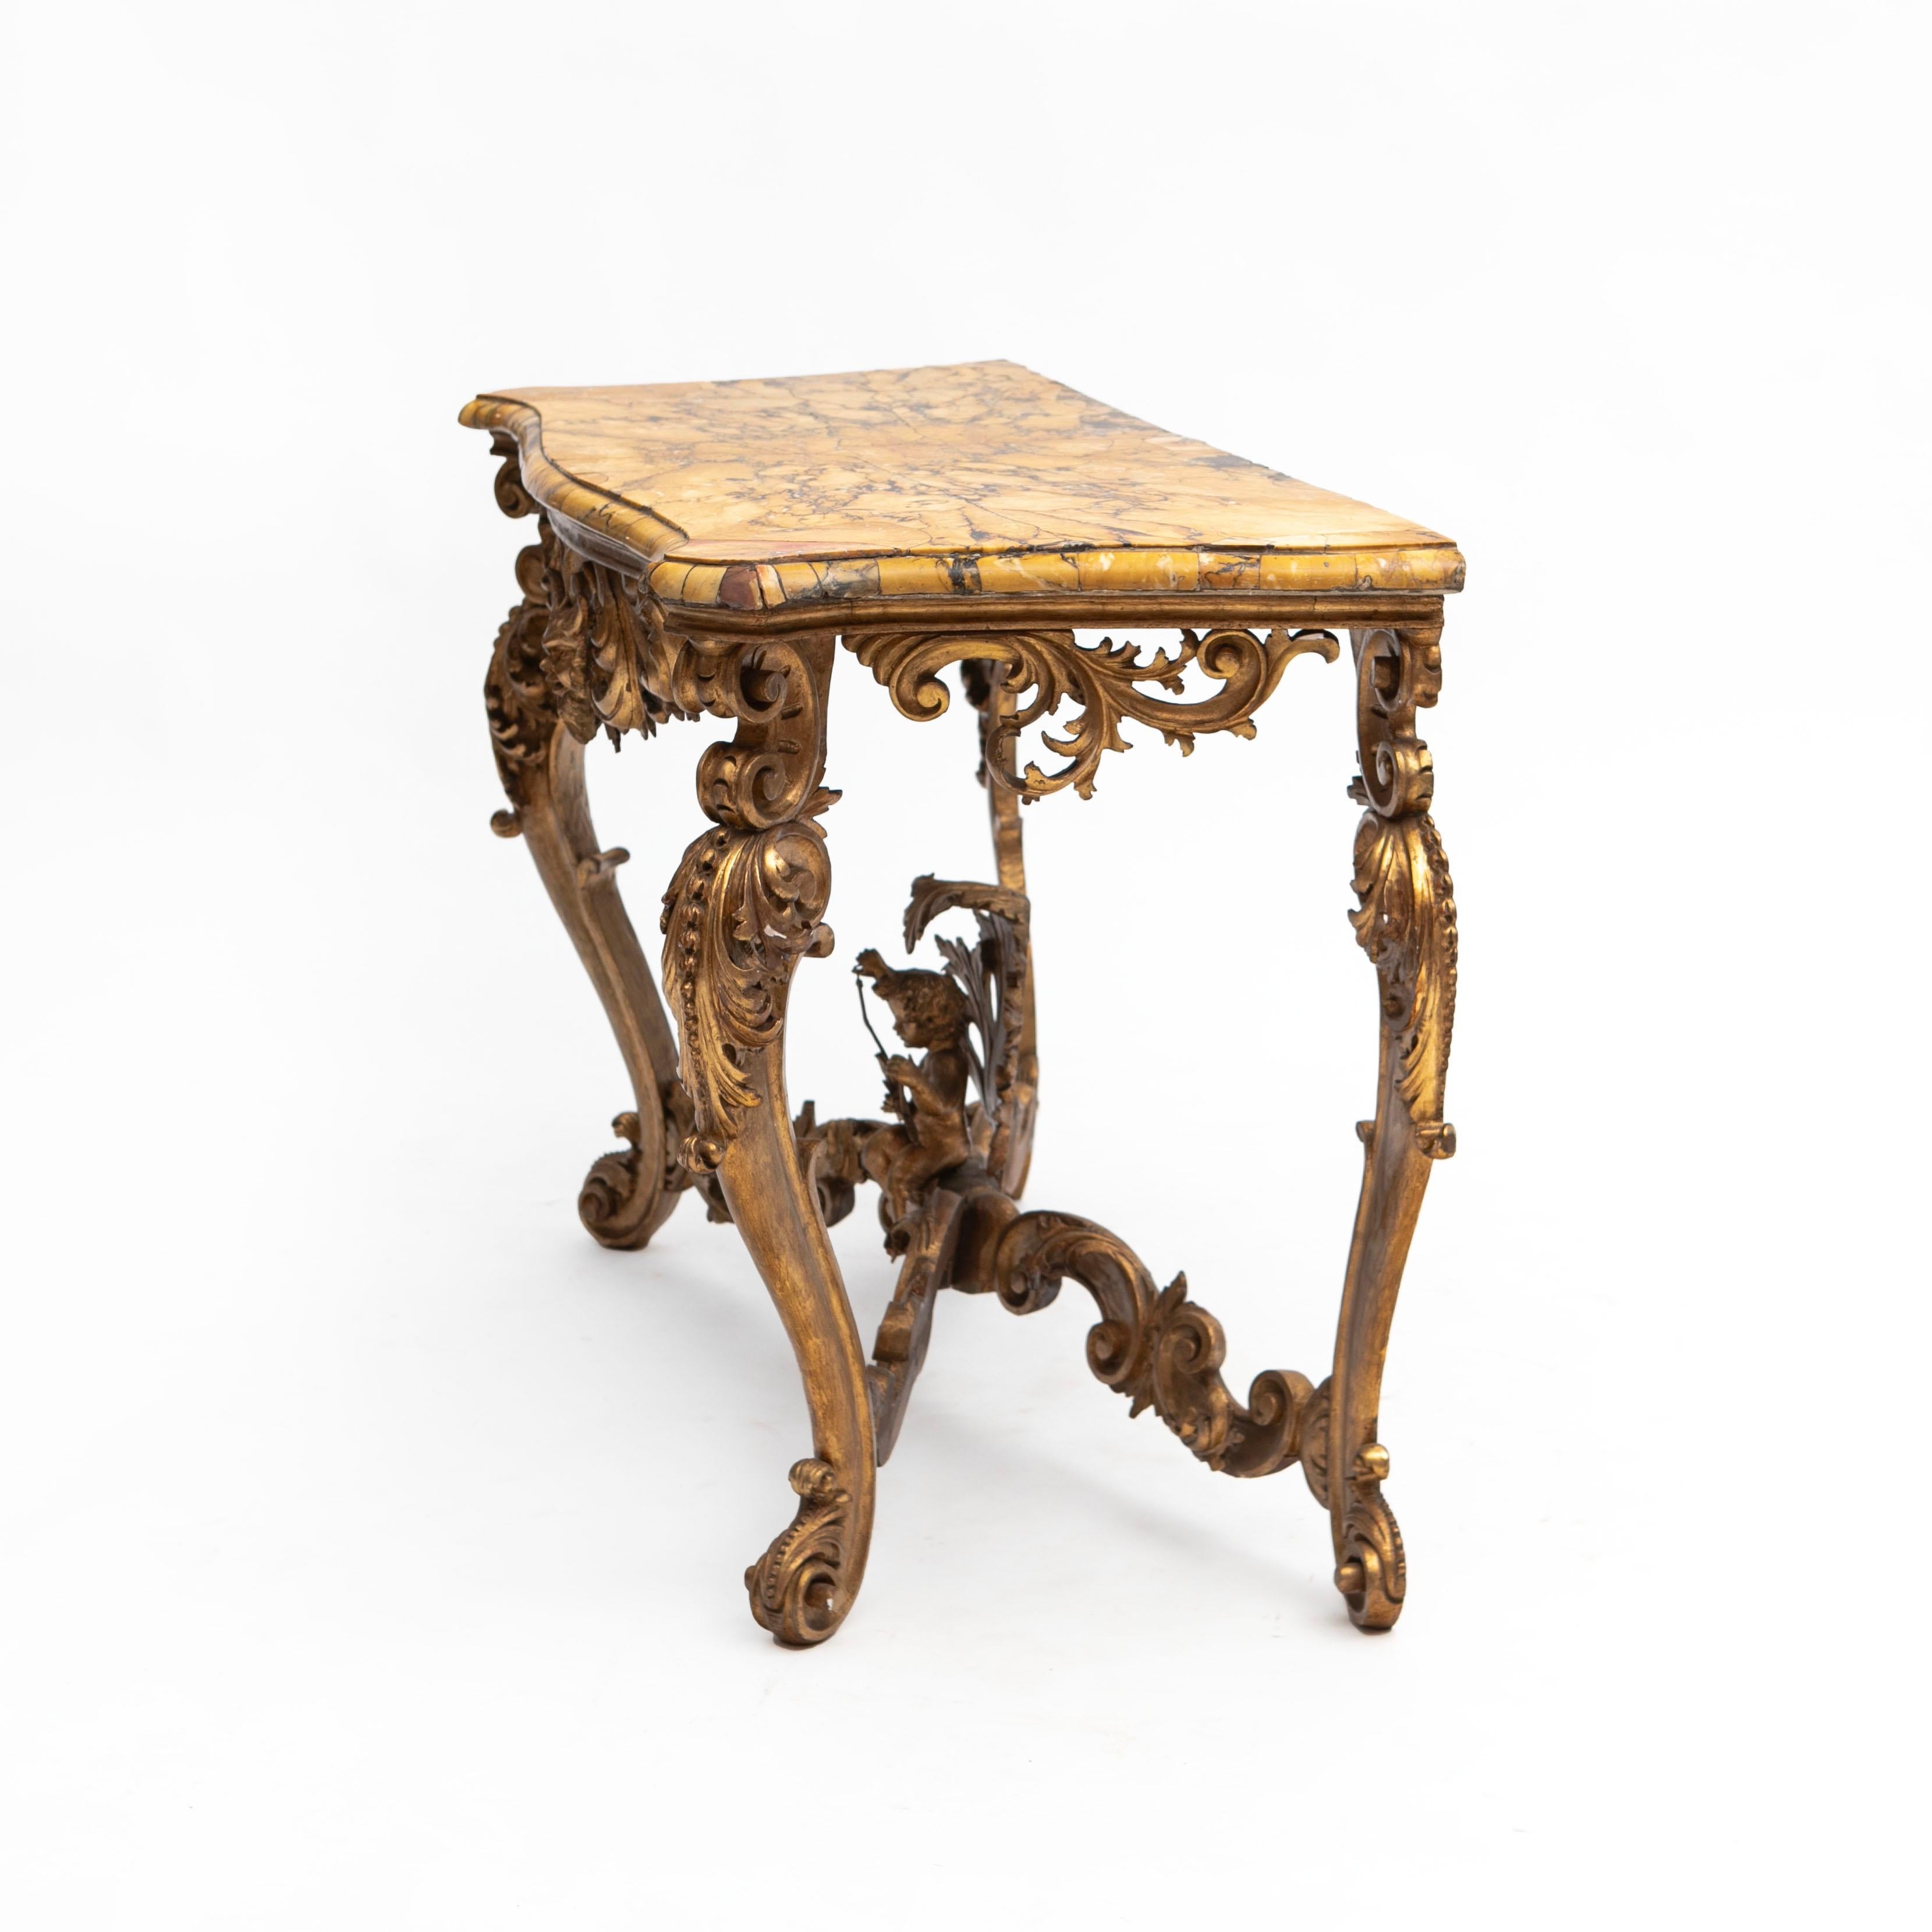 Italian 19th Century giltwood and Breche D’Alep marble console table.
Richly hand-carved gilt wood in the form of masquerades, acanthus leafs, etc.
Stunning Breche D'Alep marble top, inlaid in fragments, giveing the table top an stunning and